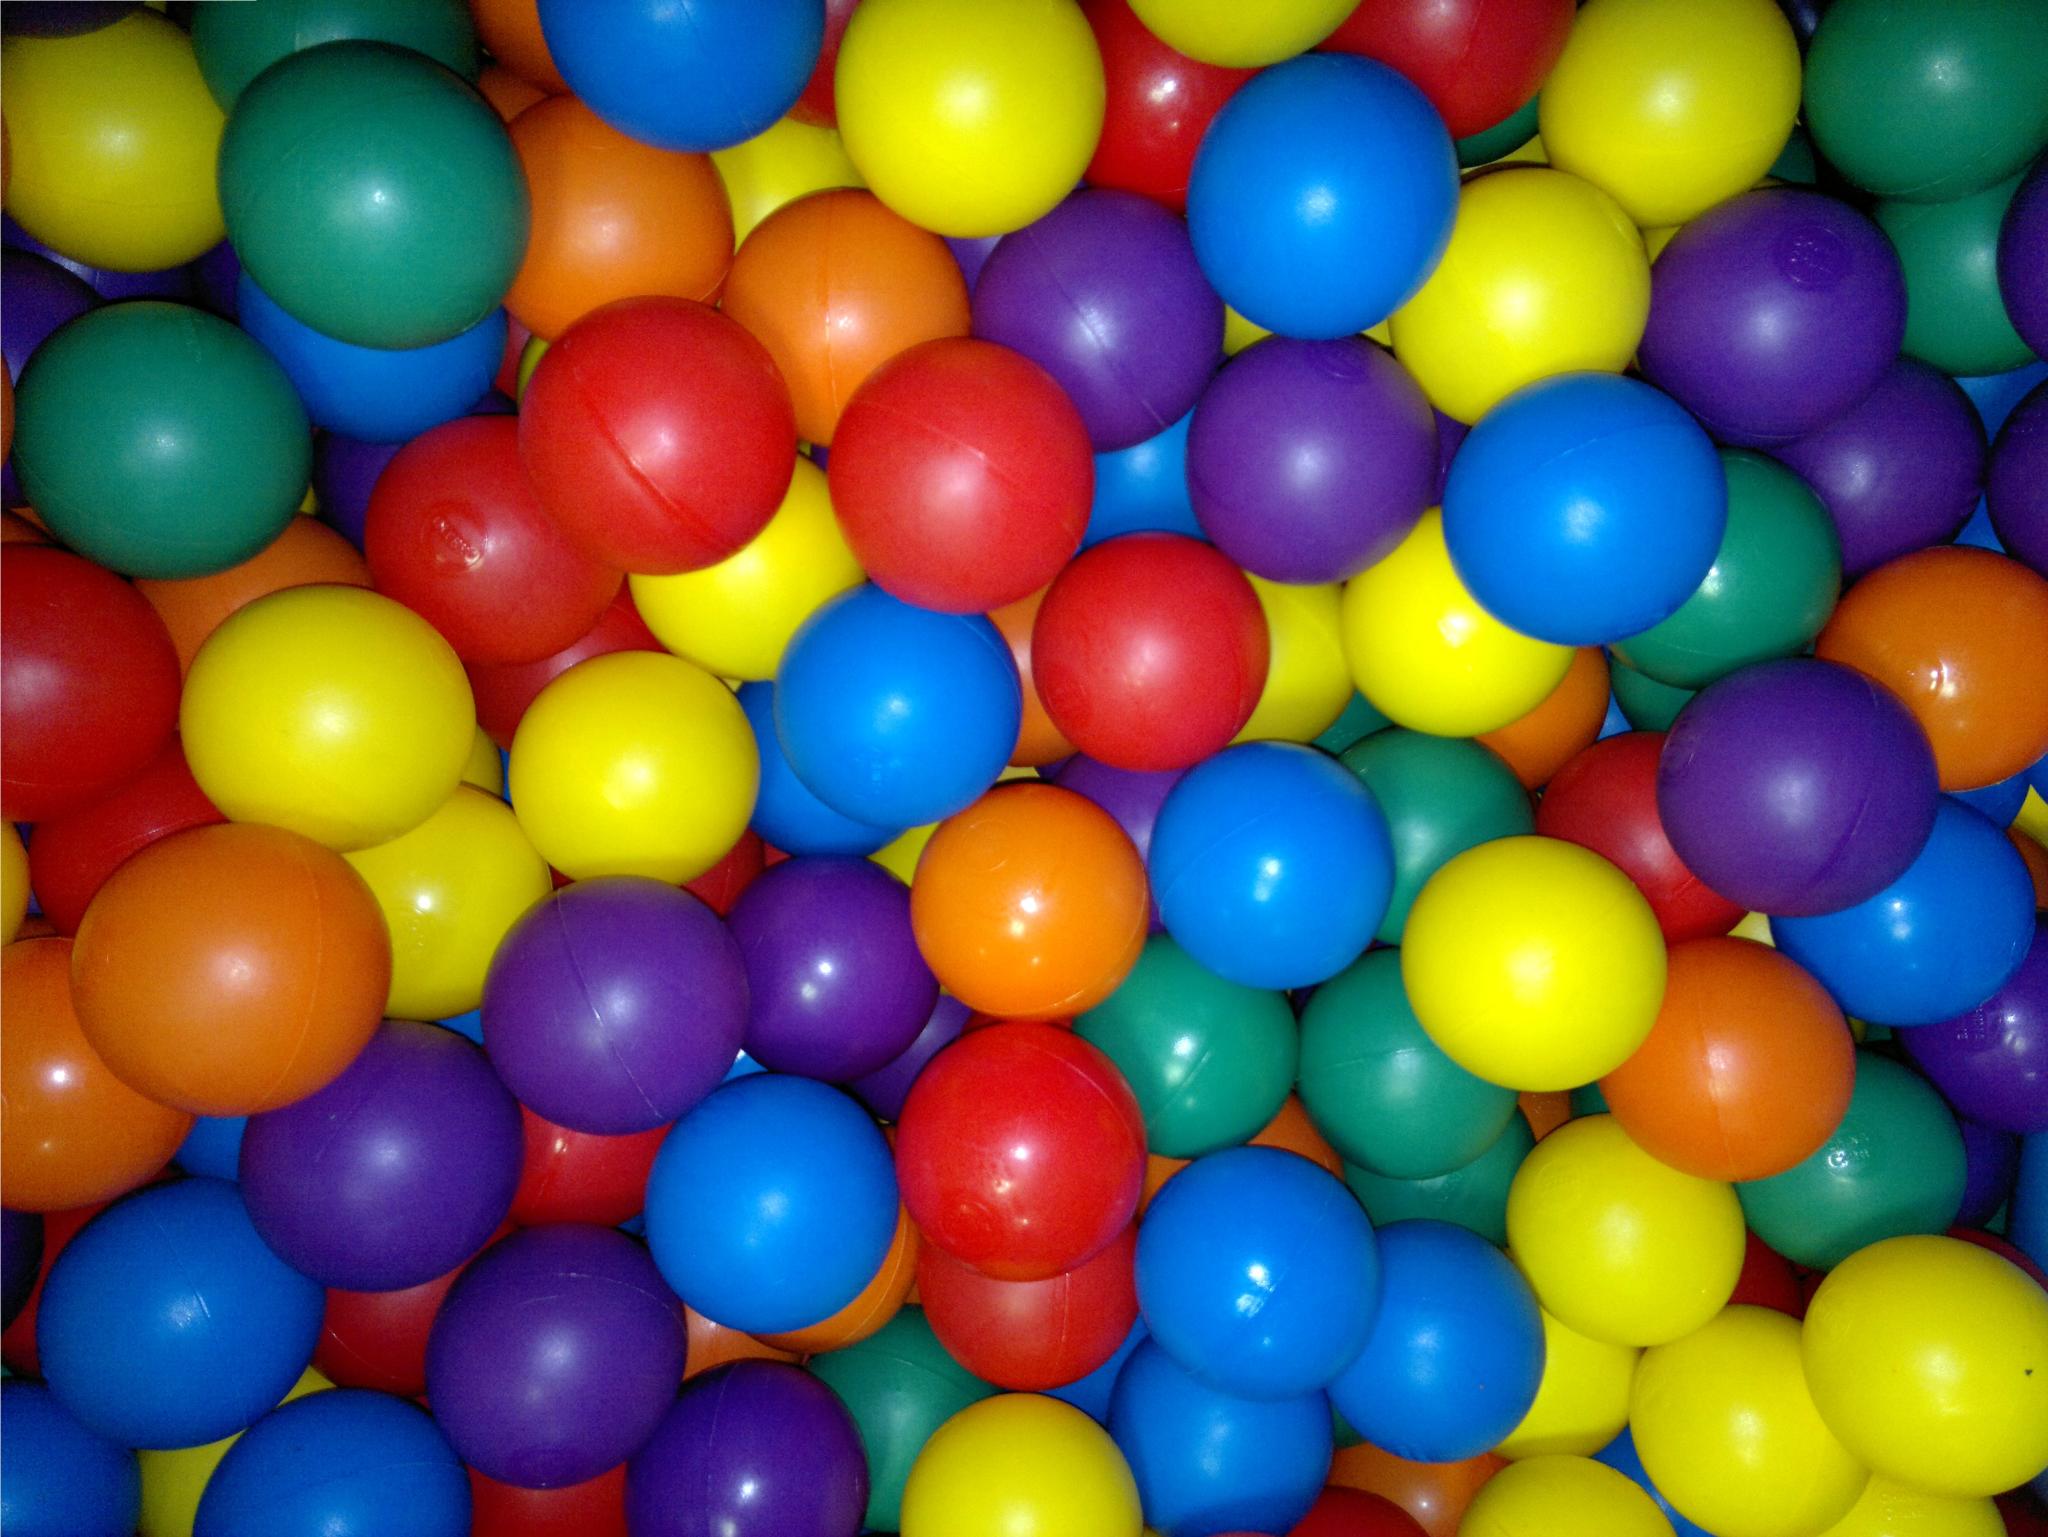 Toy_balls_with_different_Colors.jpg